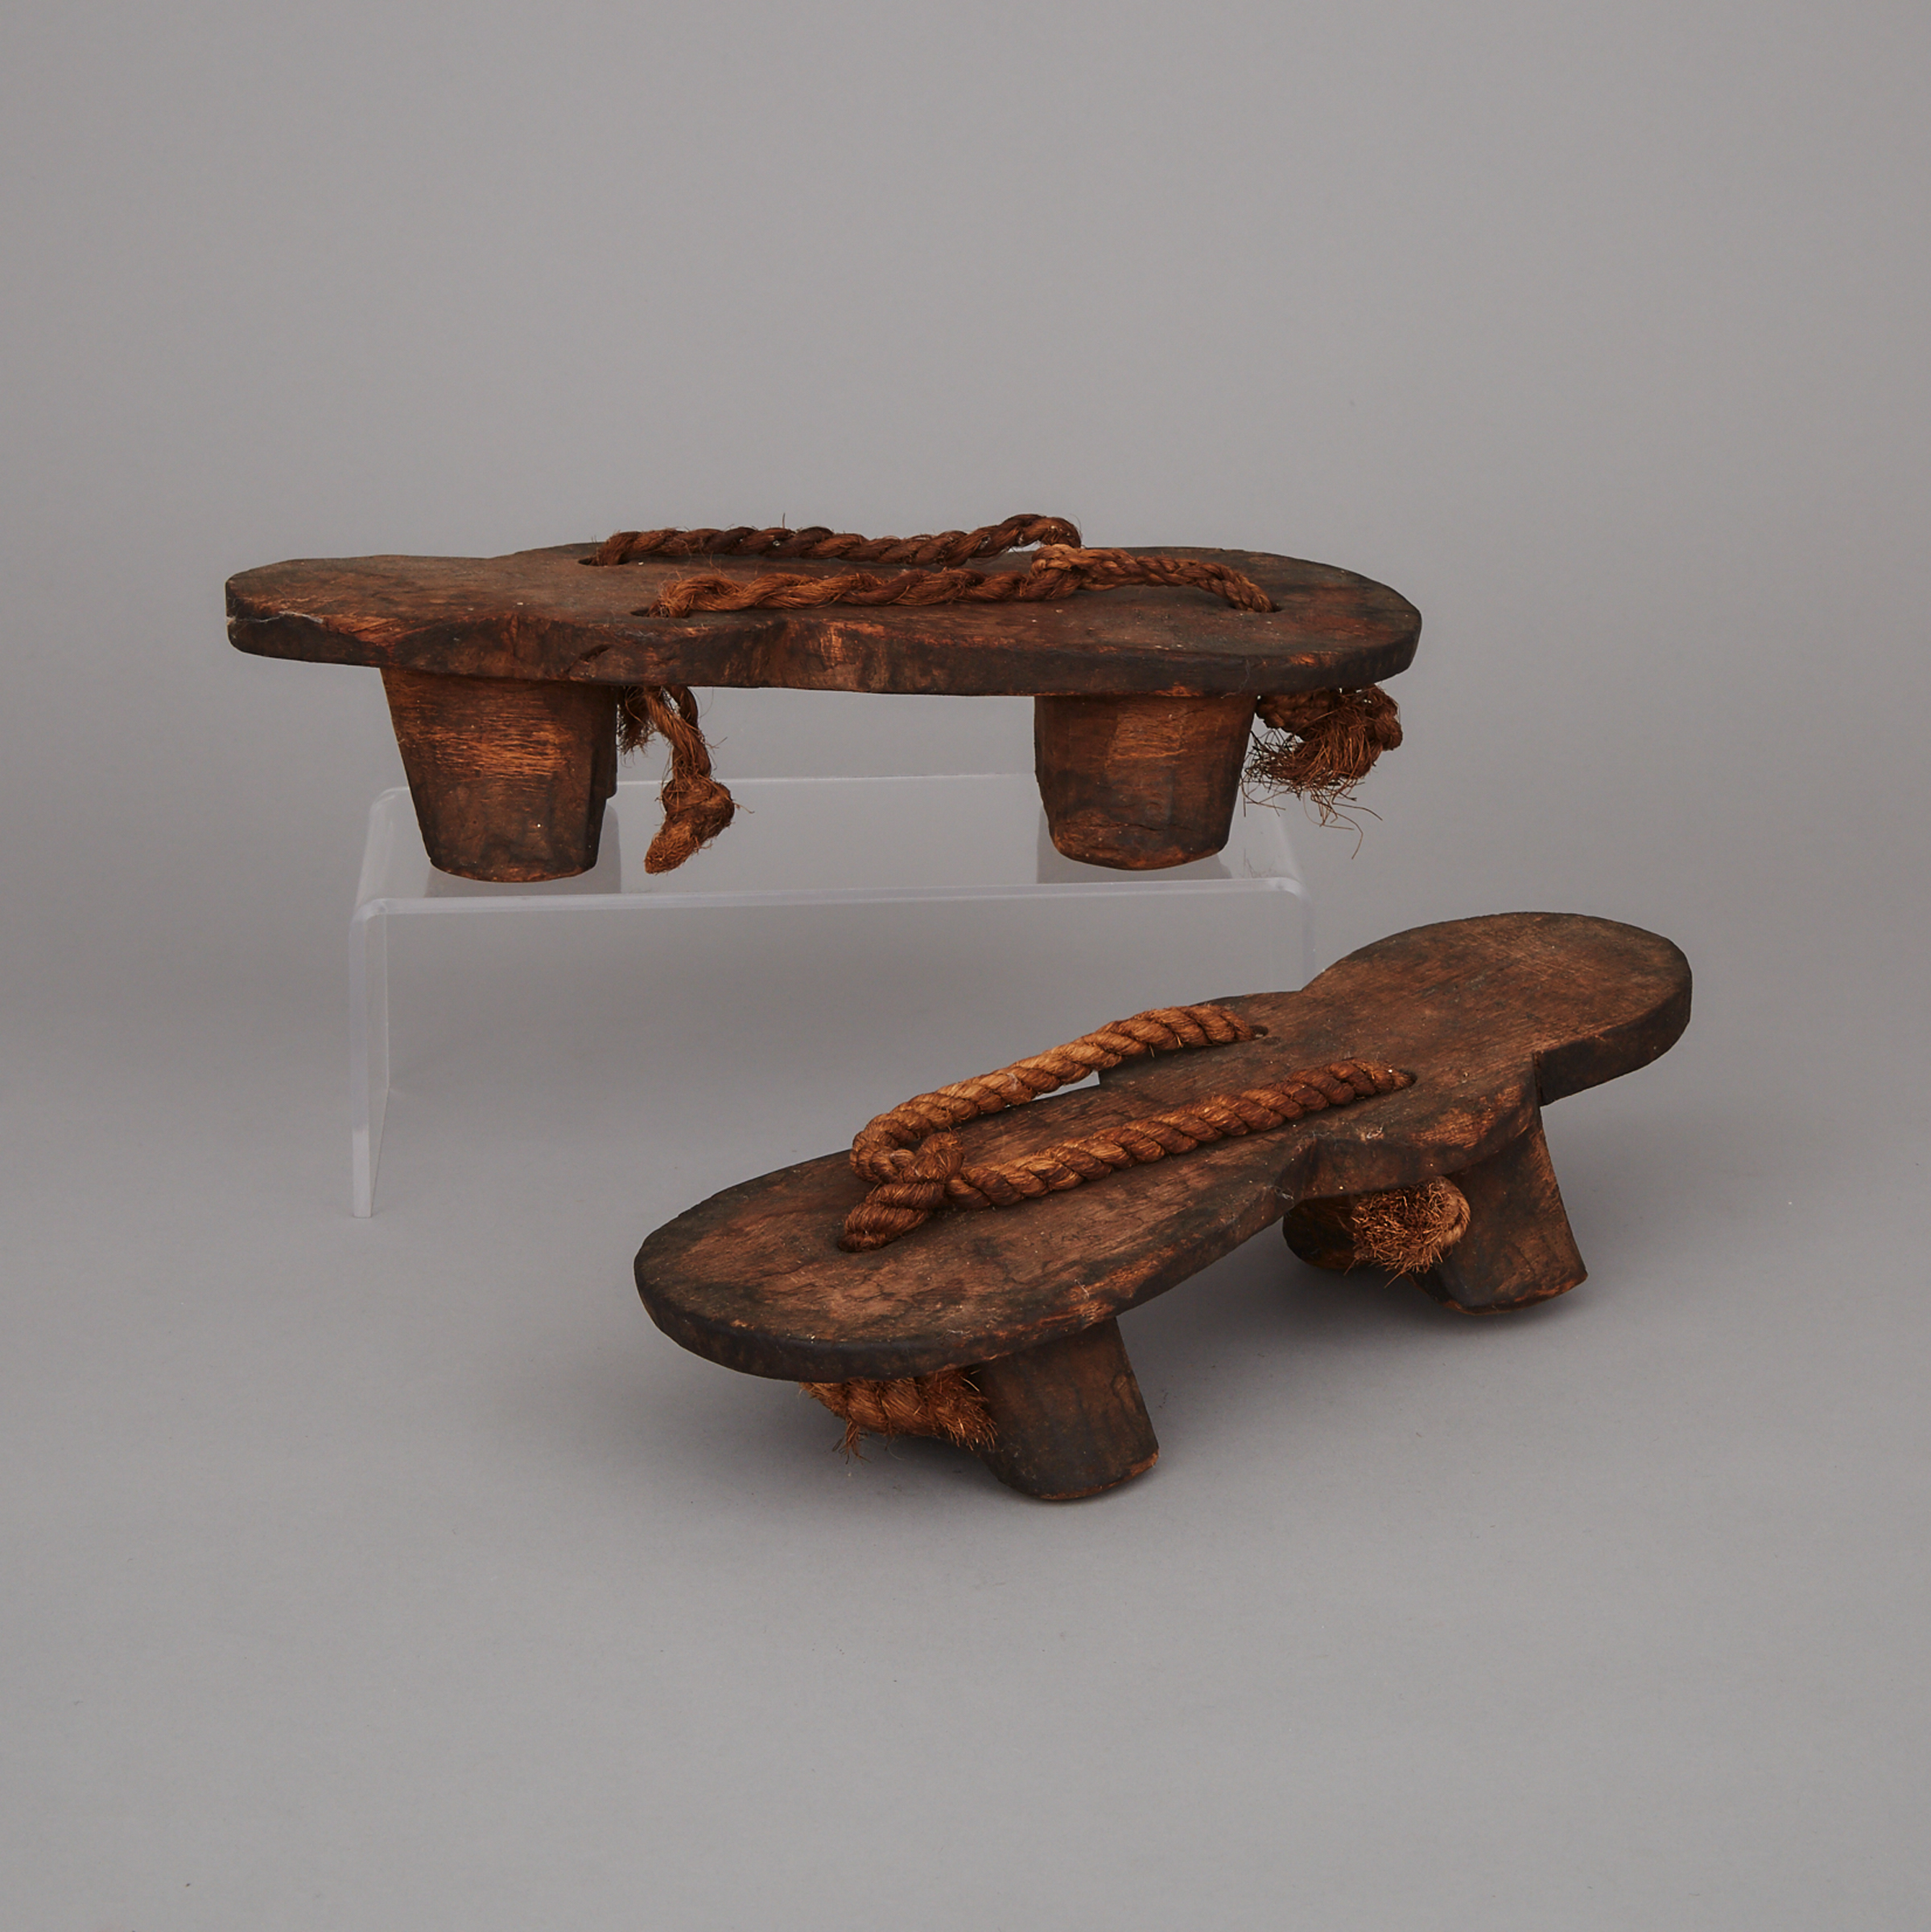 A Pair of Japanese Wooden Clogs